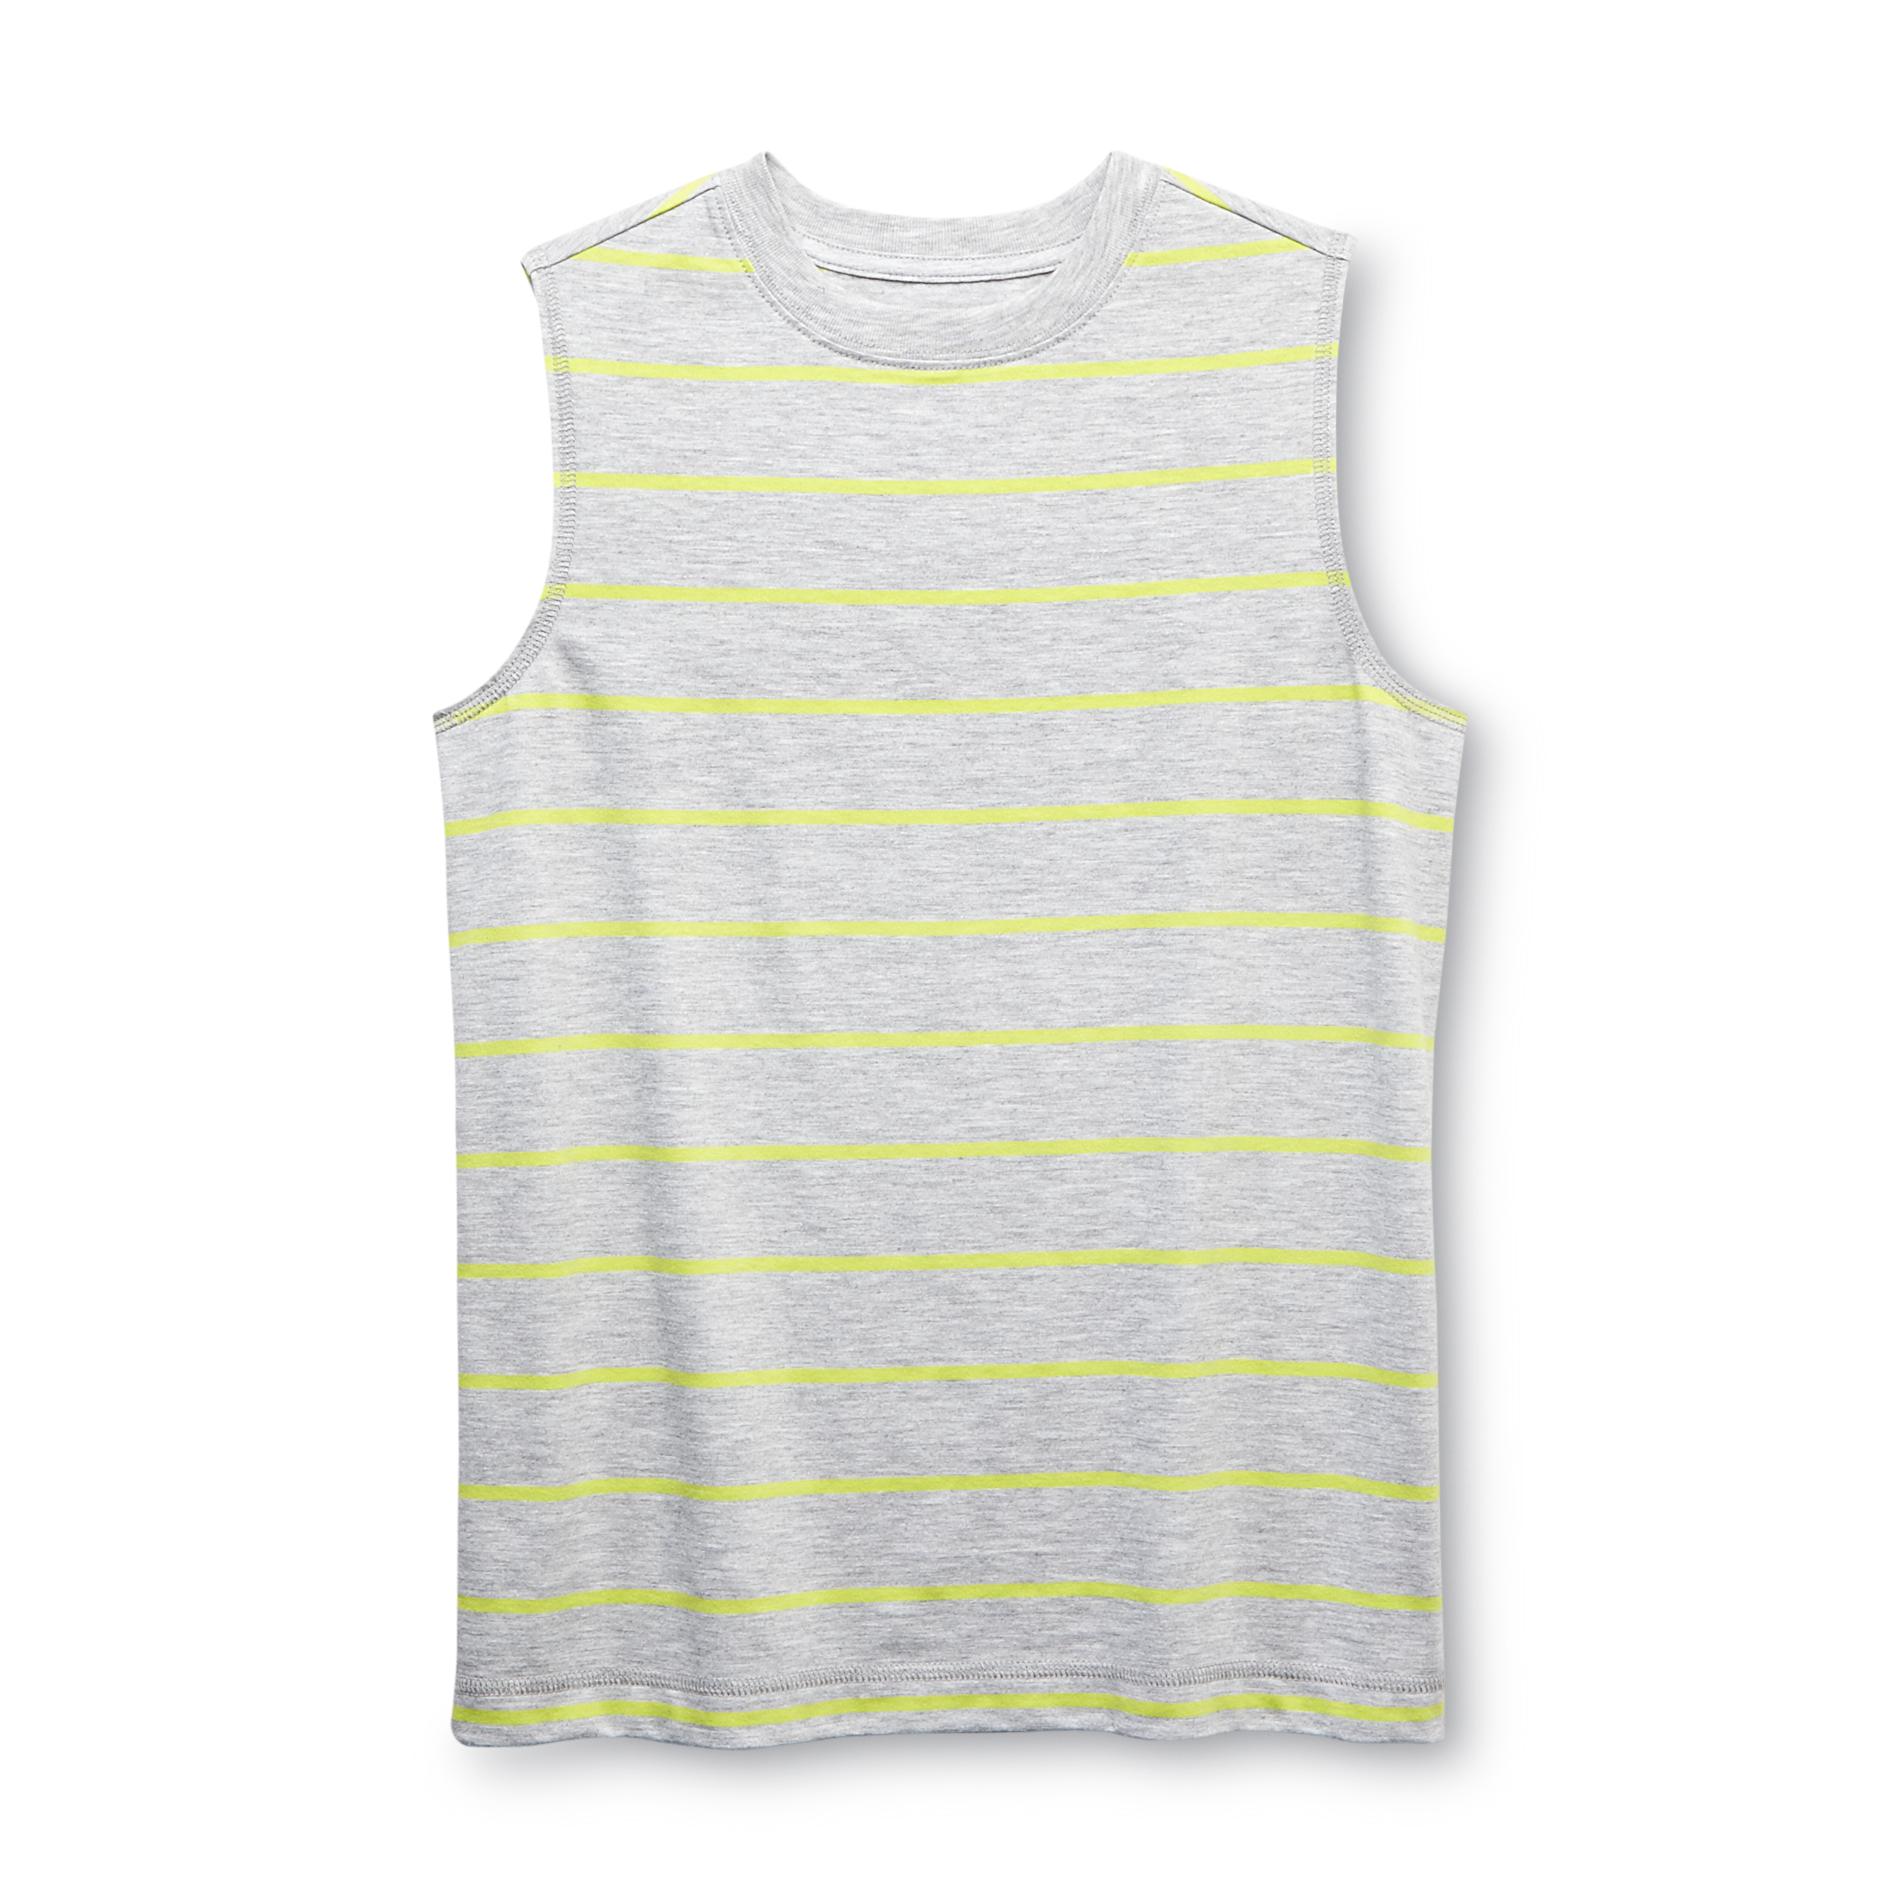 Basic Editions Boy's Muscle Shirt - Striped